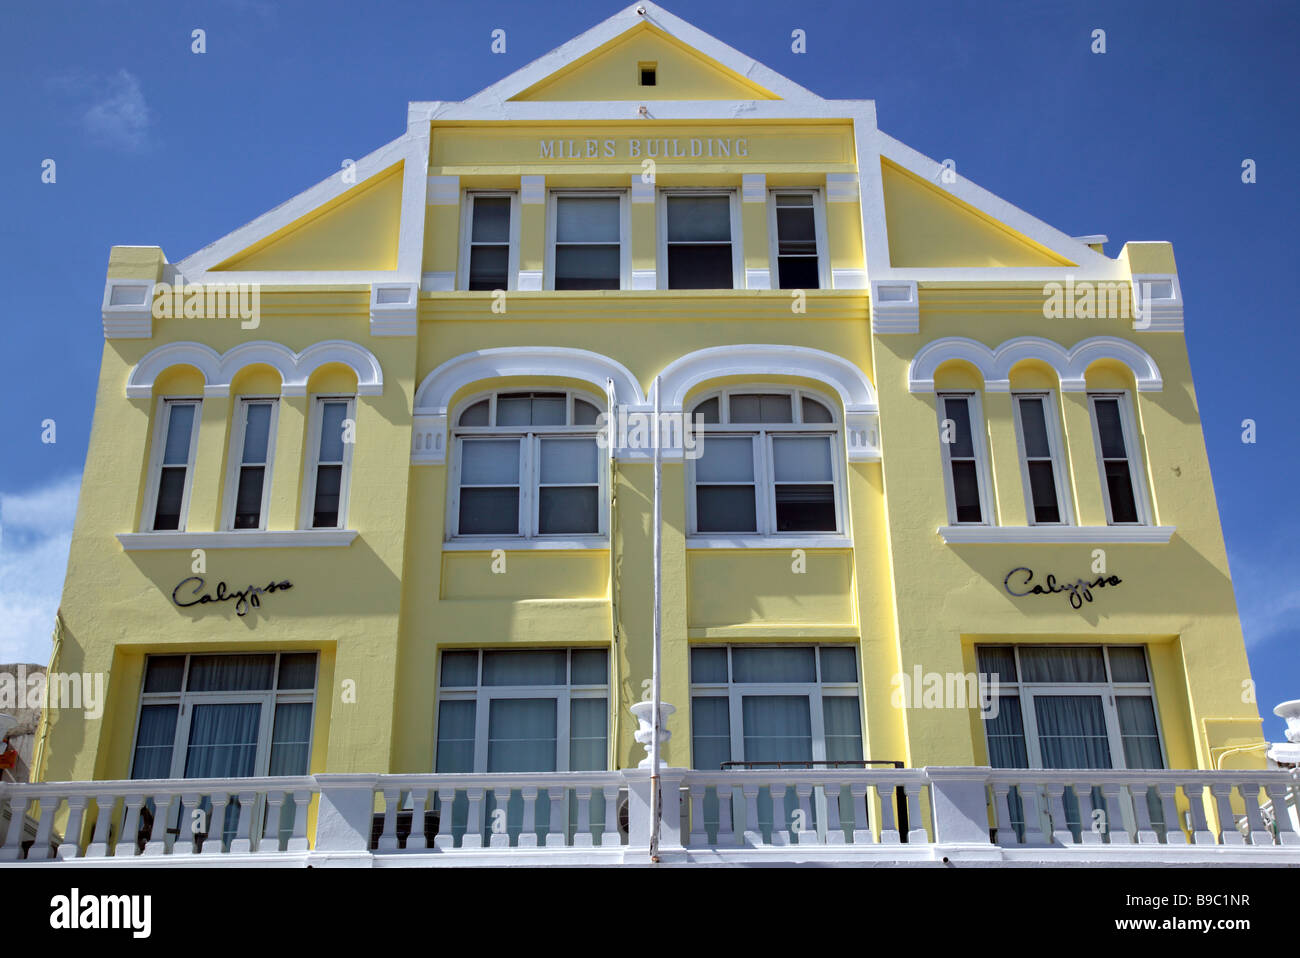 Close-up shot of the Miles Building, Front Street, City of Hamilton, Bermuda Stock Photo